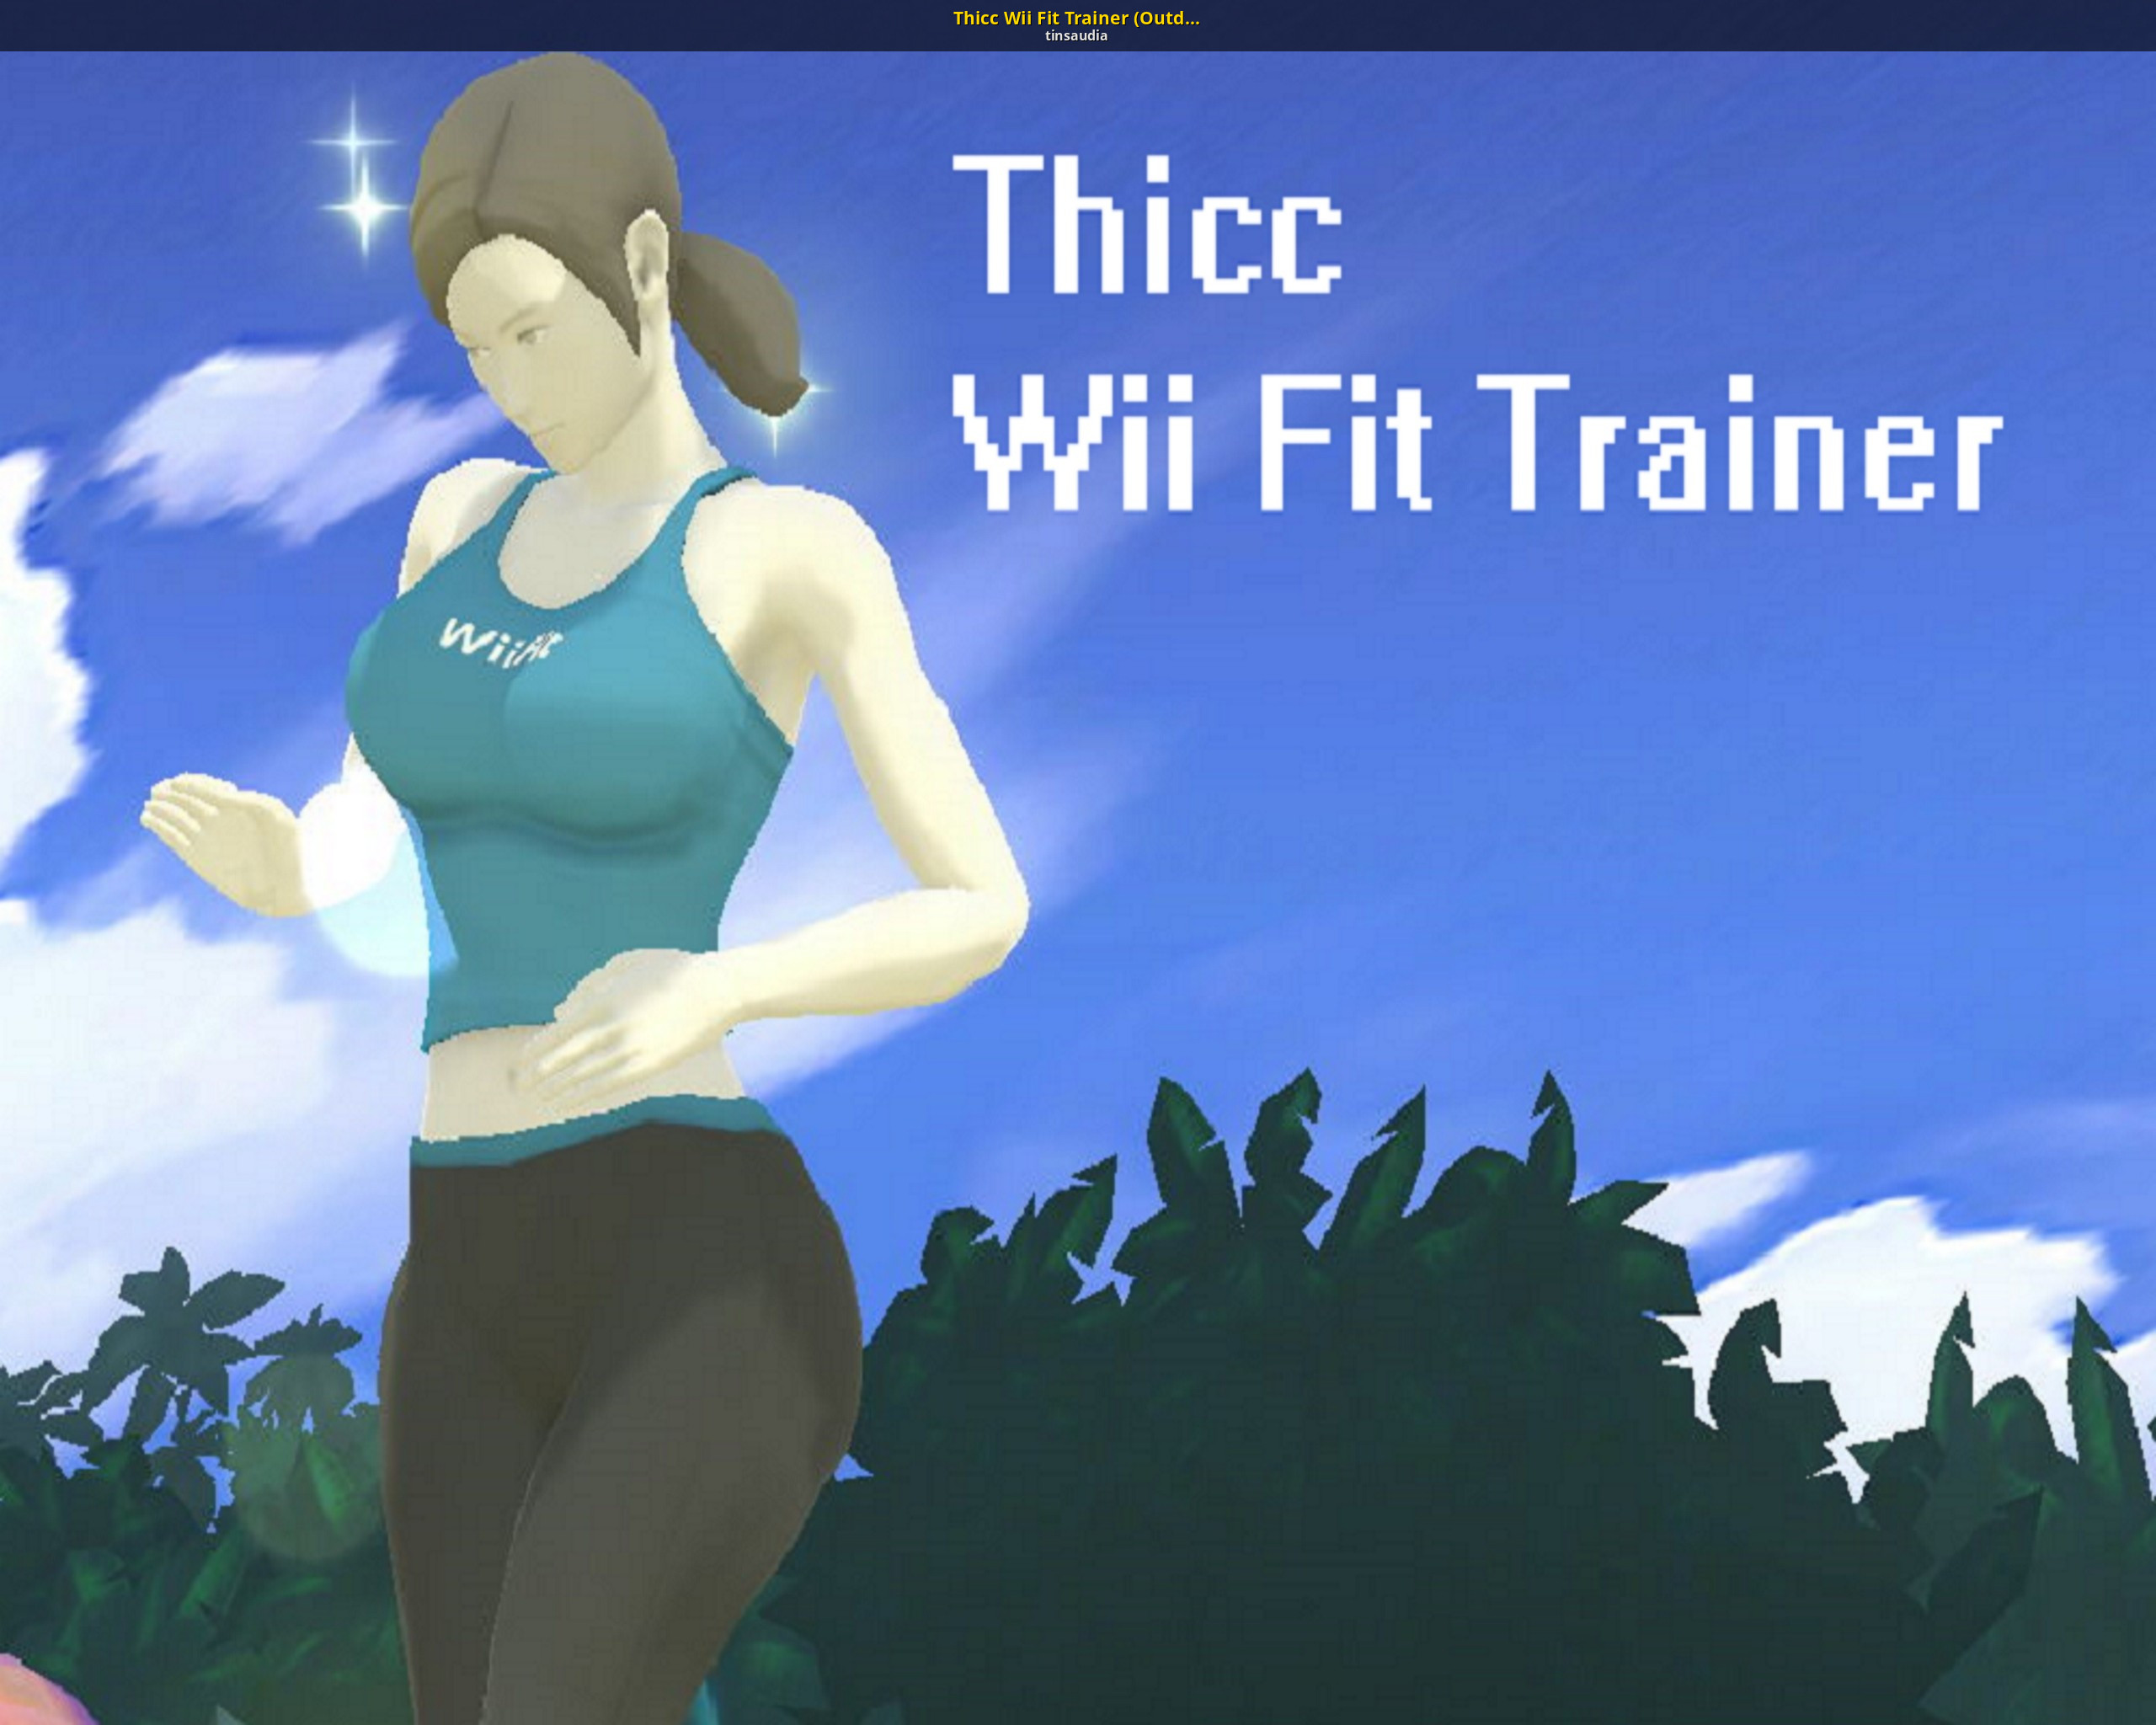 Wii fit. Wii Fit тренер. Wii Fit Trainer super Smash. Wii Fit Trainer 34. Wii Fit Trainer 18.